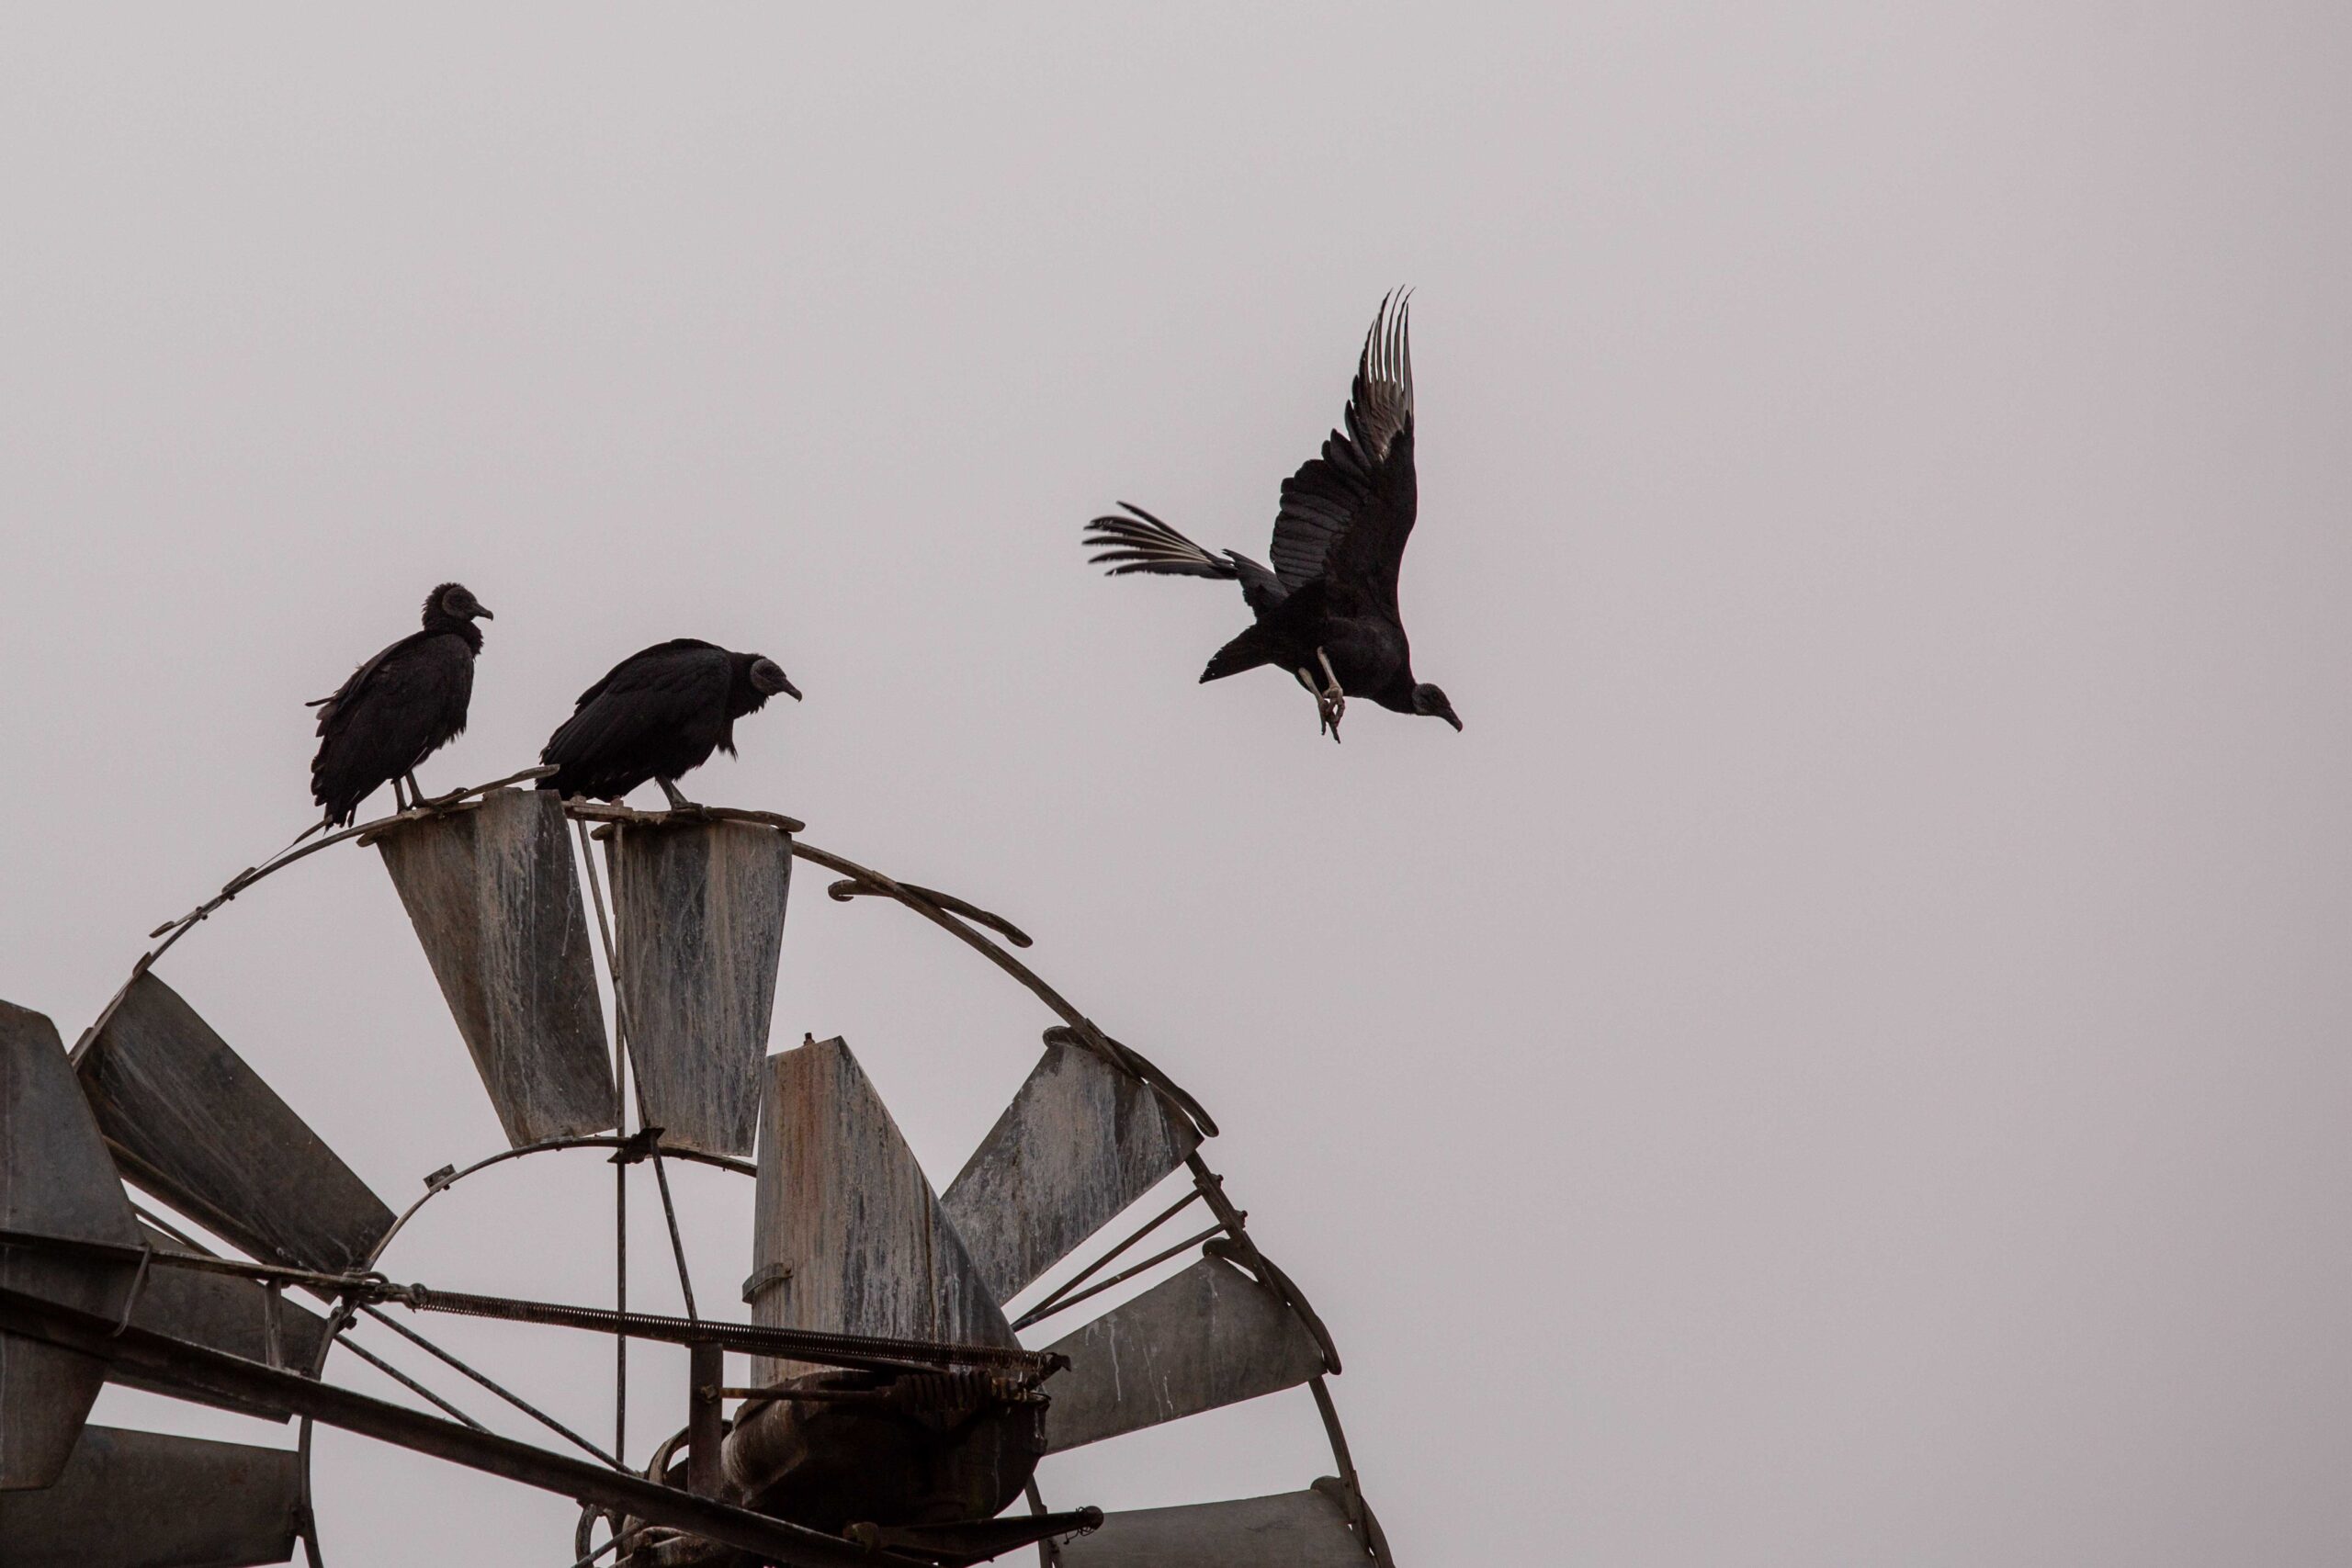 A black vulture takes flight from a windmill overlooking dozens of bodies in various stages of decomposition at the Texas State Forensic Anthropology Research Facility Freeman Ranch, or the Body Ranch. Two other vultures remain perched.